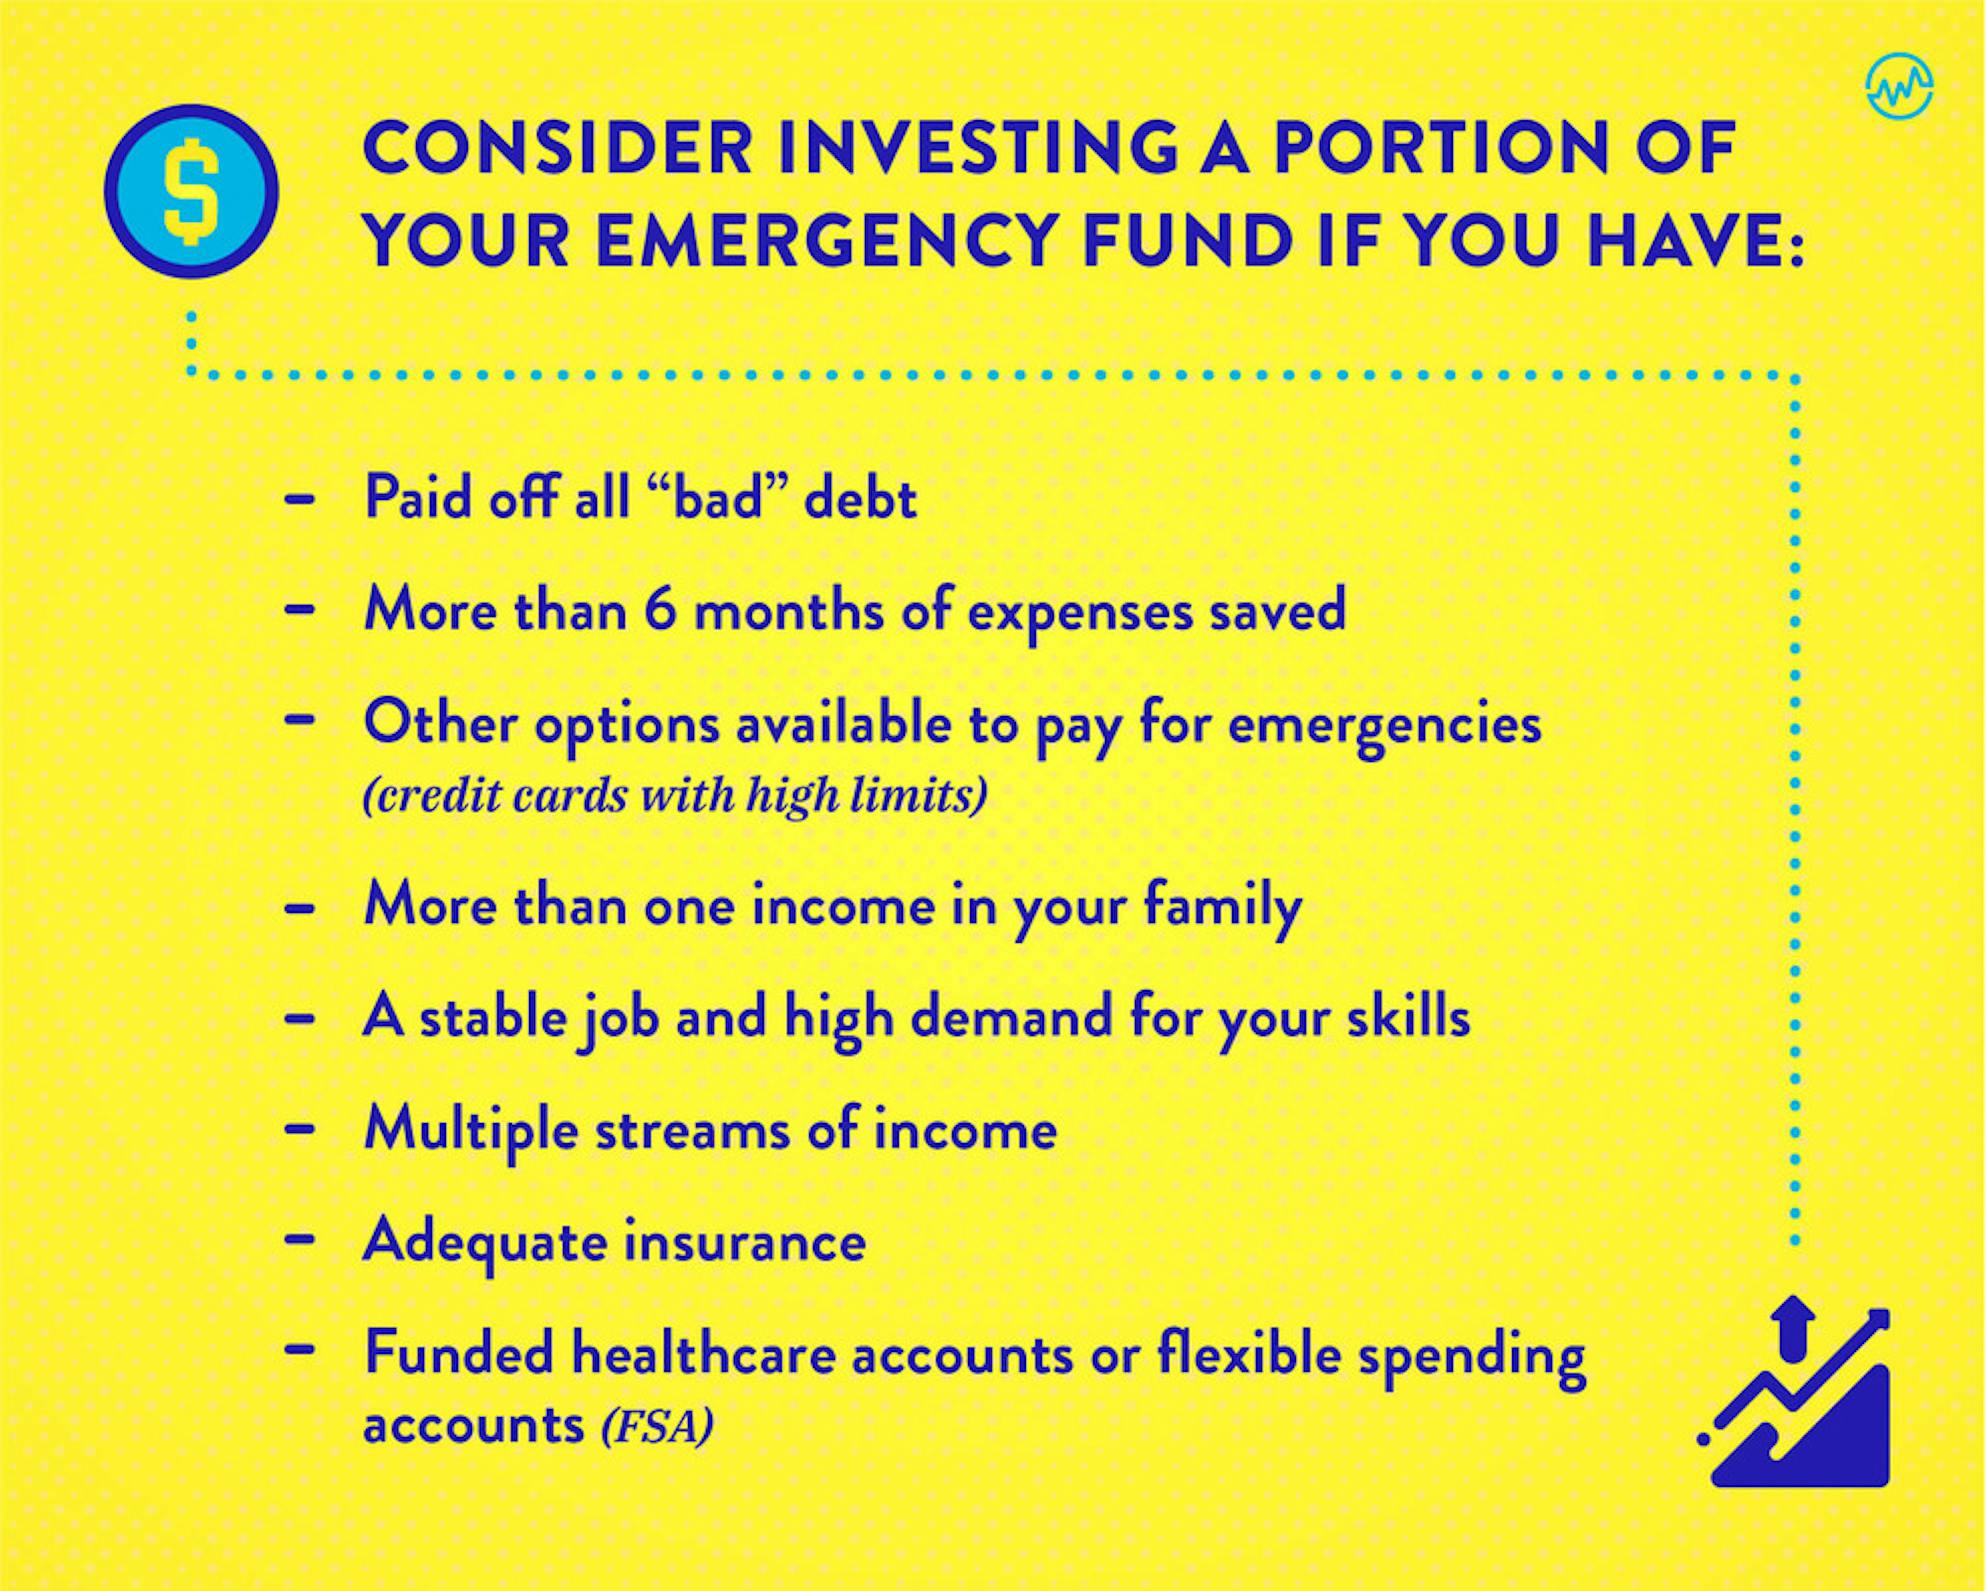 Consider kinvesting a portion of your emergency fund if you have the following graphic